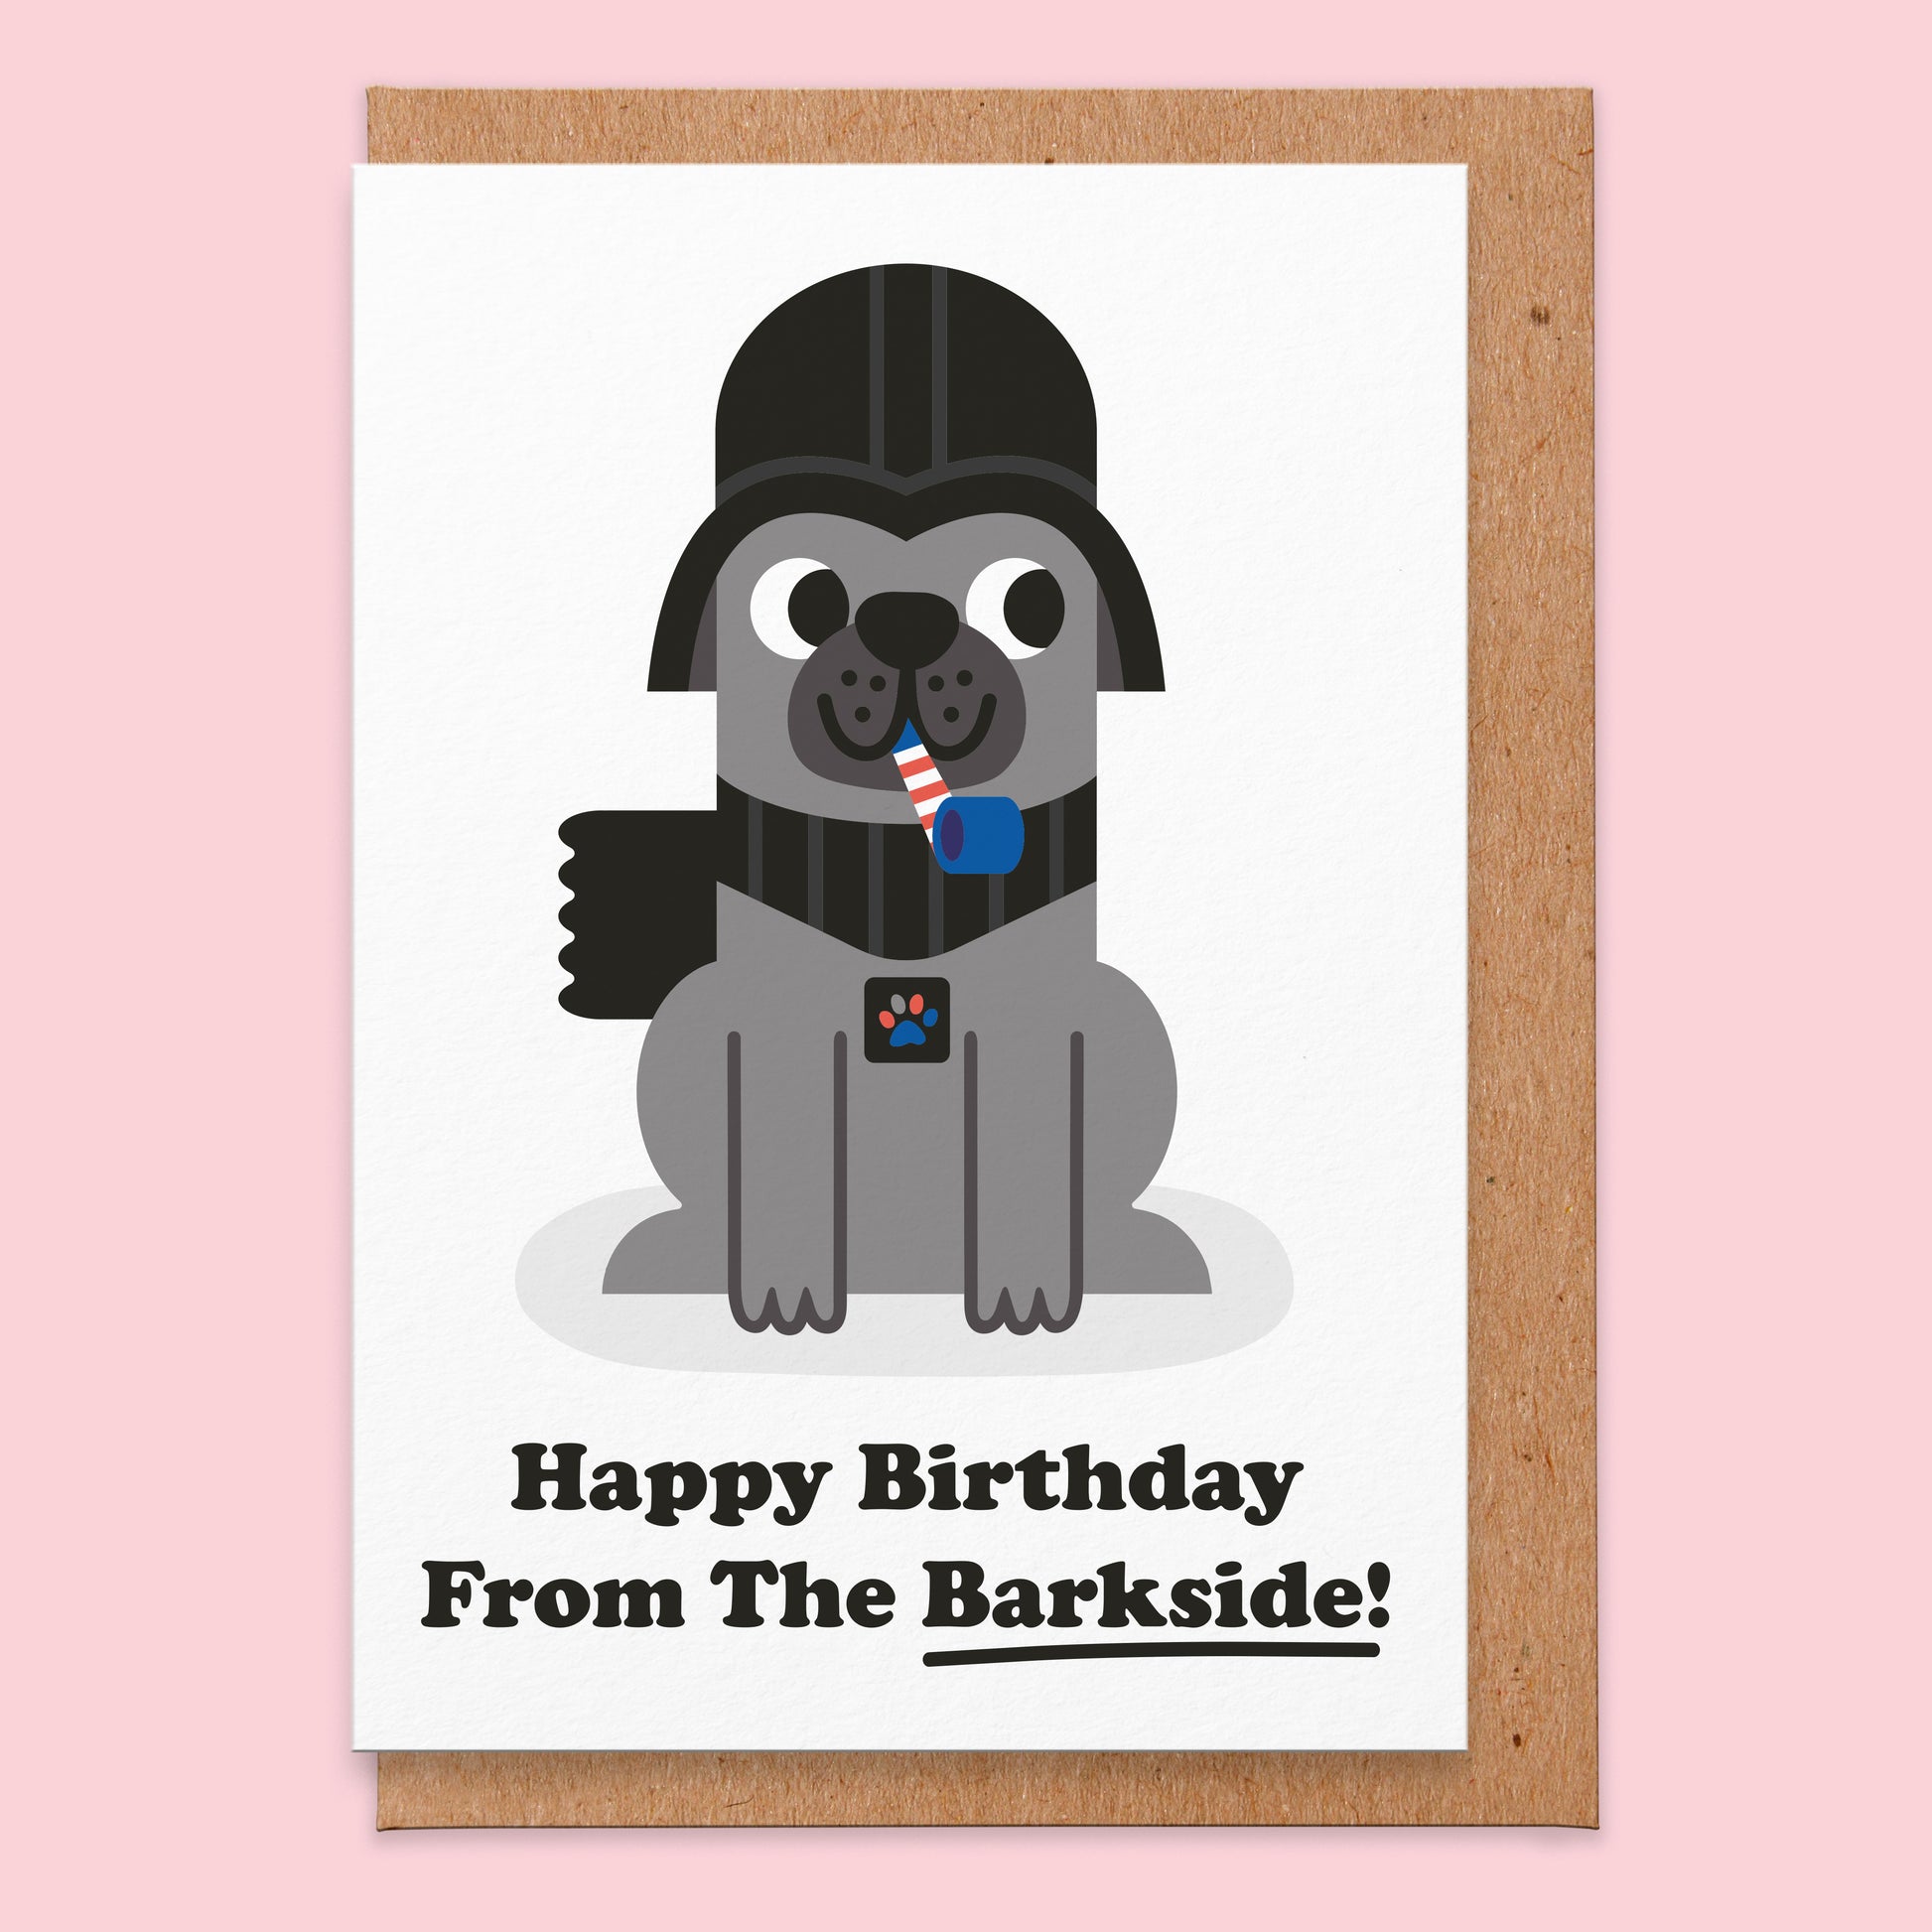 Birthday card that has a white background and has an illustration of a dog dressed up as dark sci fi villain. The card reads happy birthday from the barkside.